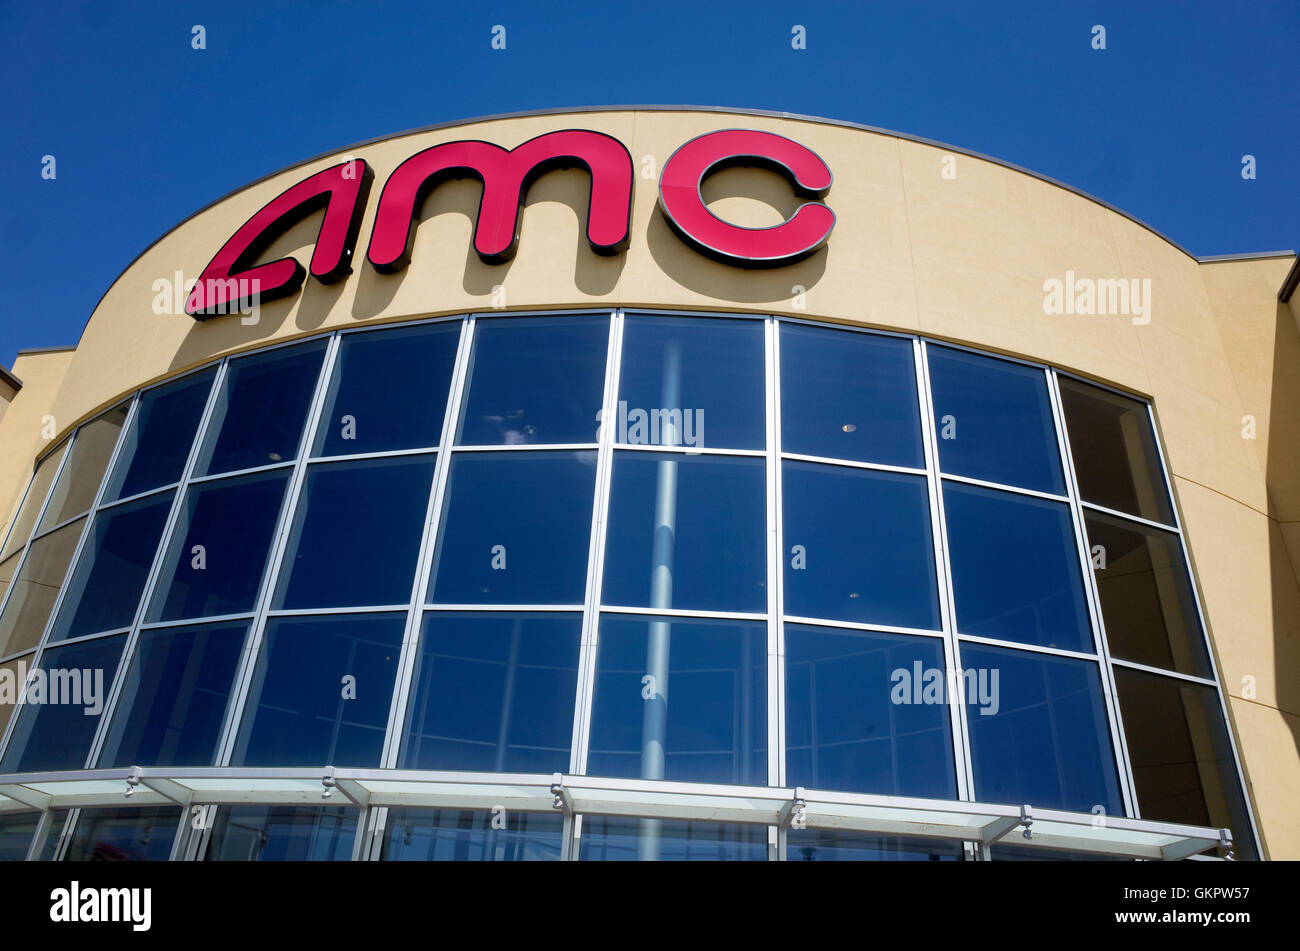 AMC theater marquee in bright red letters. Roseville Minnesota MN USA Stock Photo